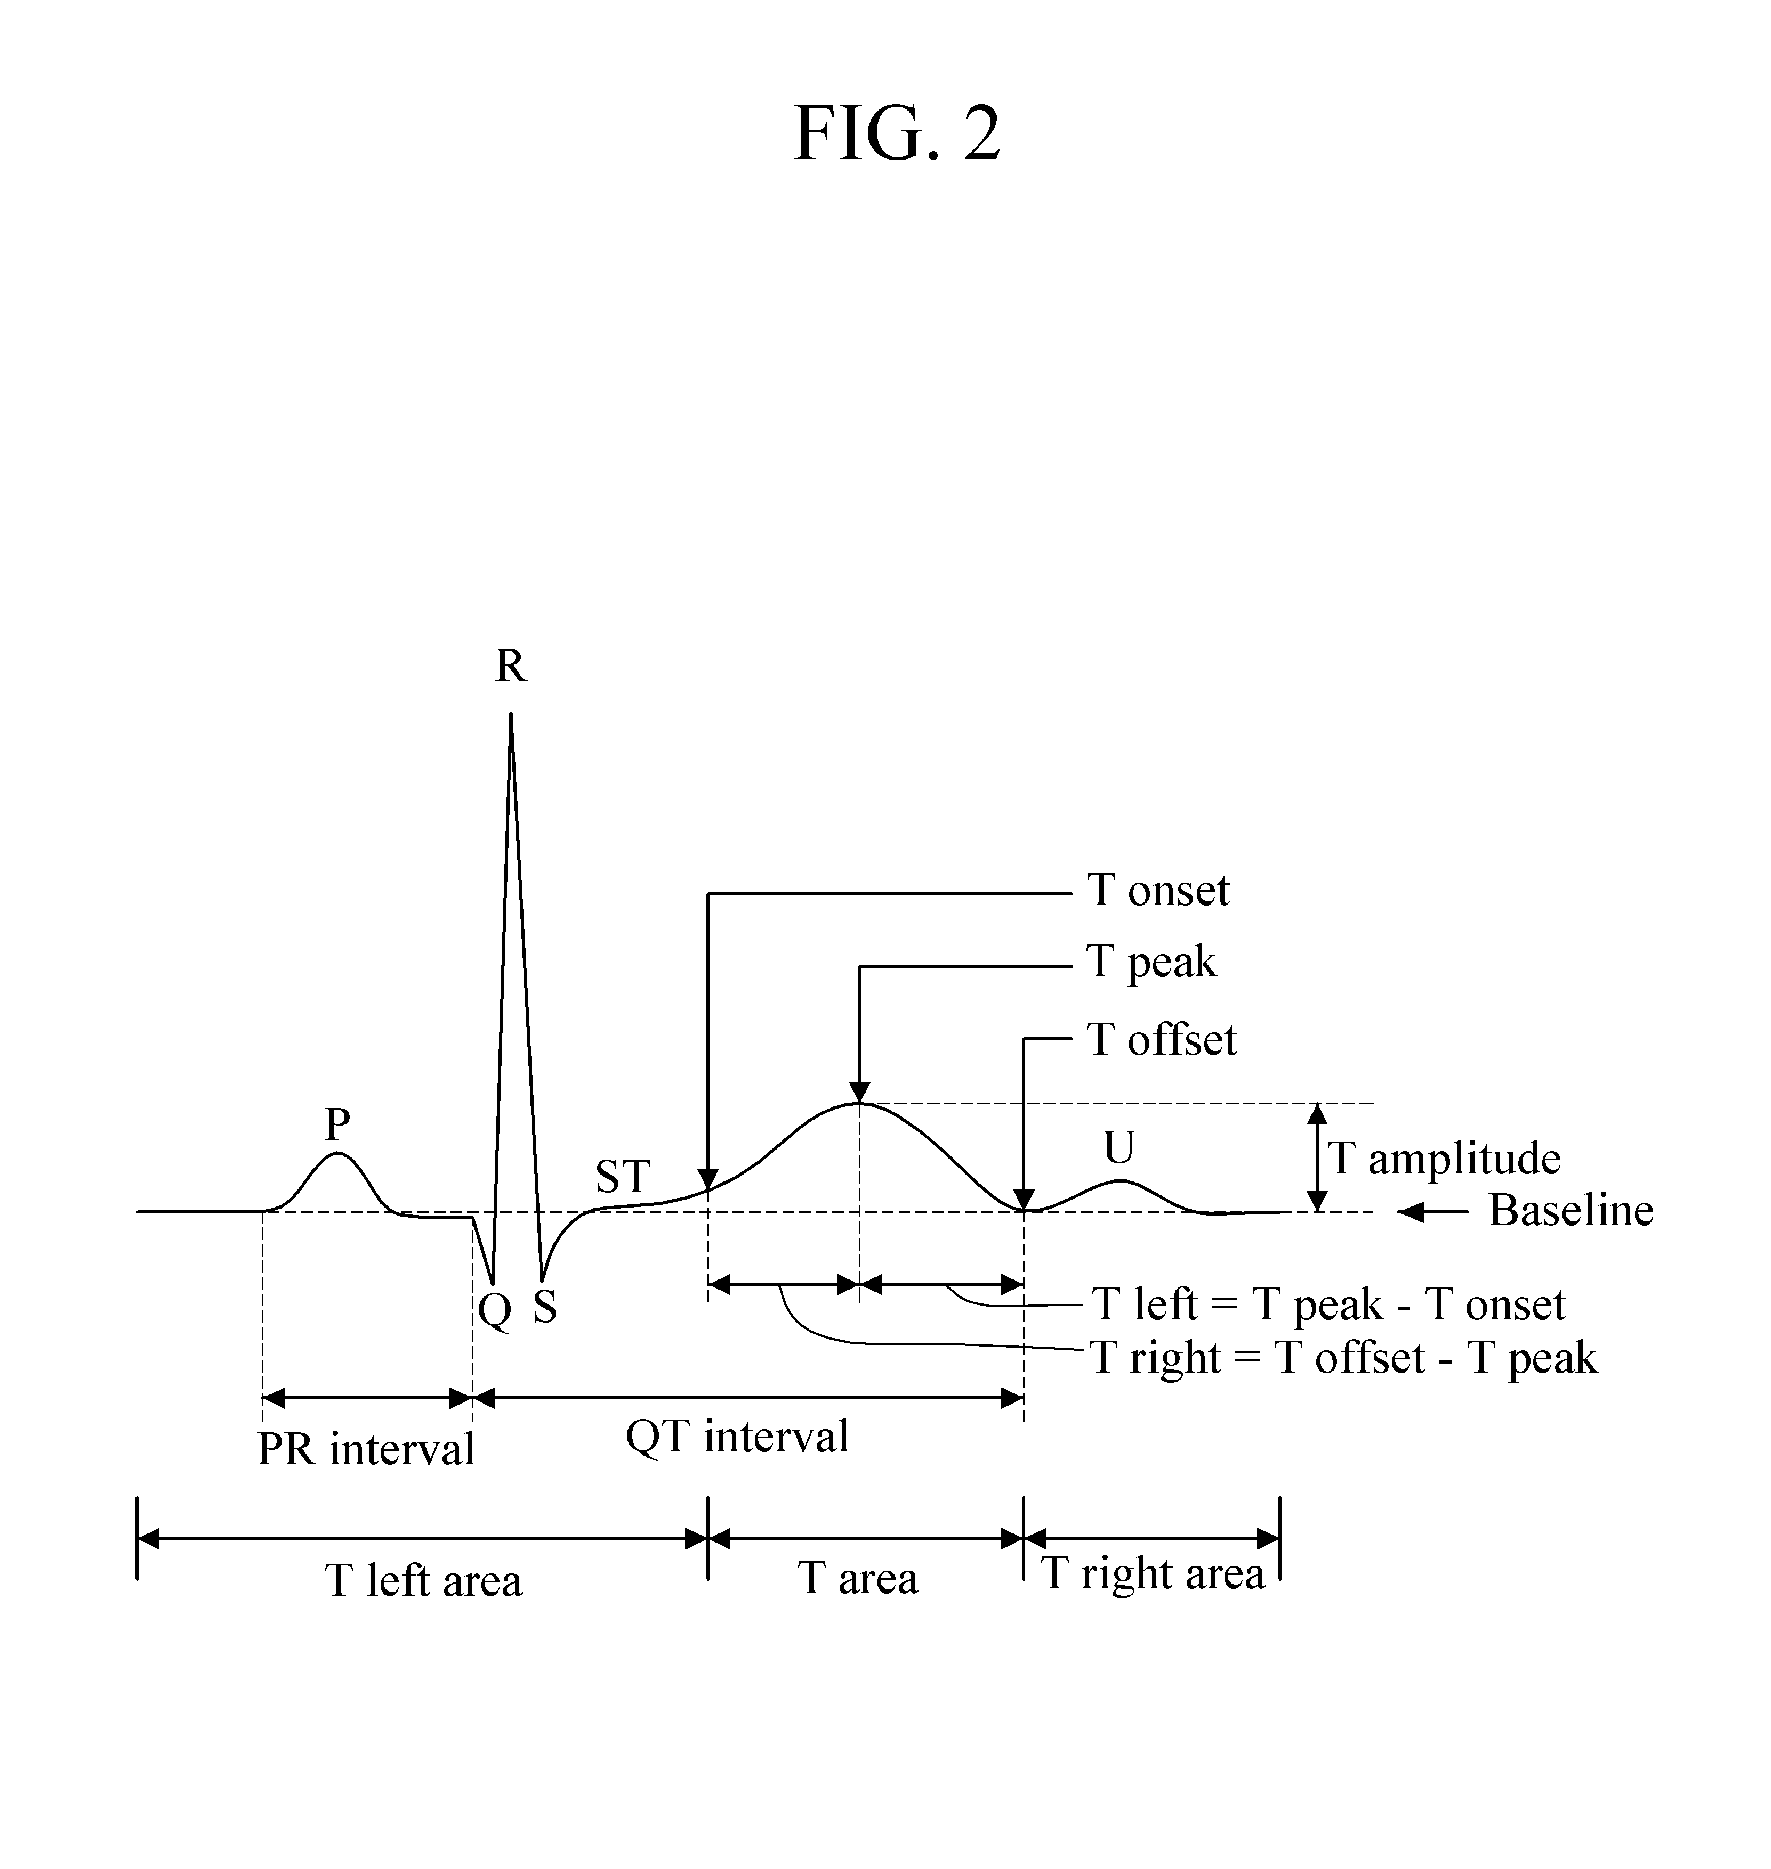 Apparatus and method for generating atrial fibrillation prediction model, and apparatus and method for predicting atrial fibrillation